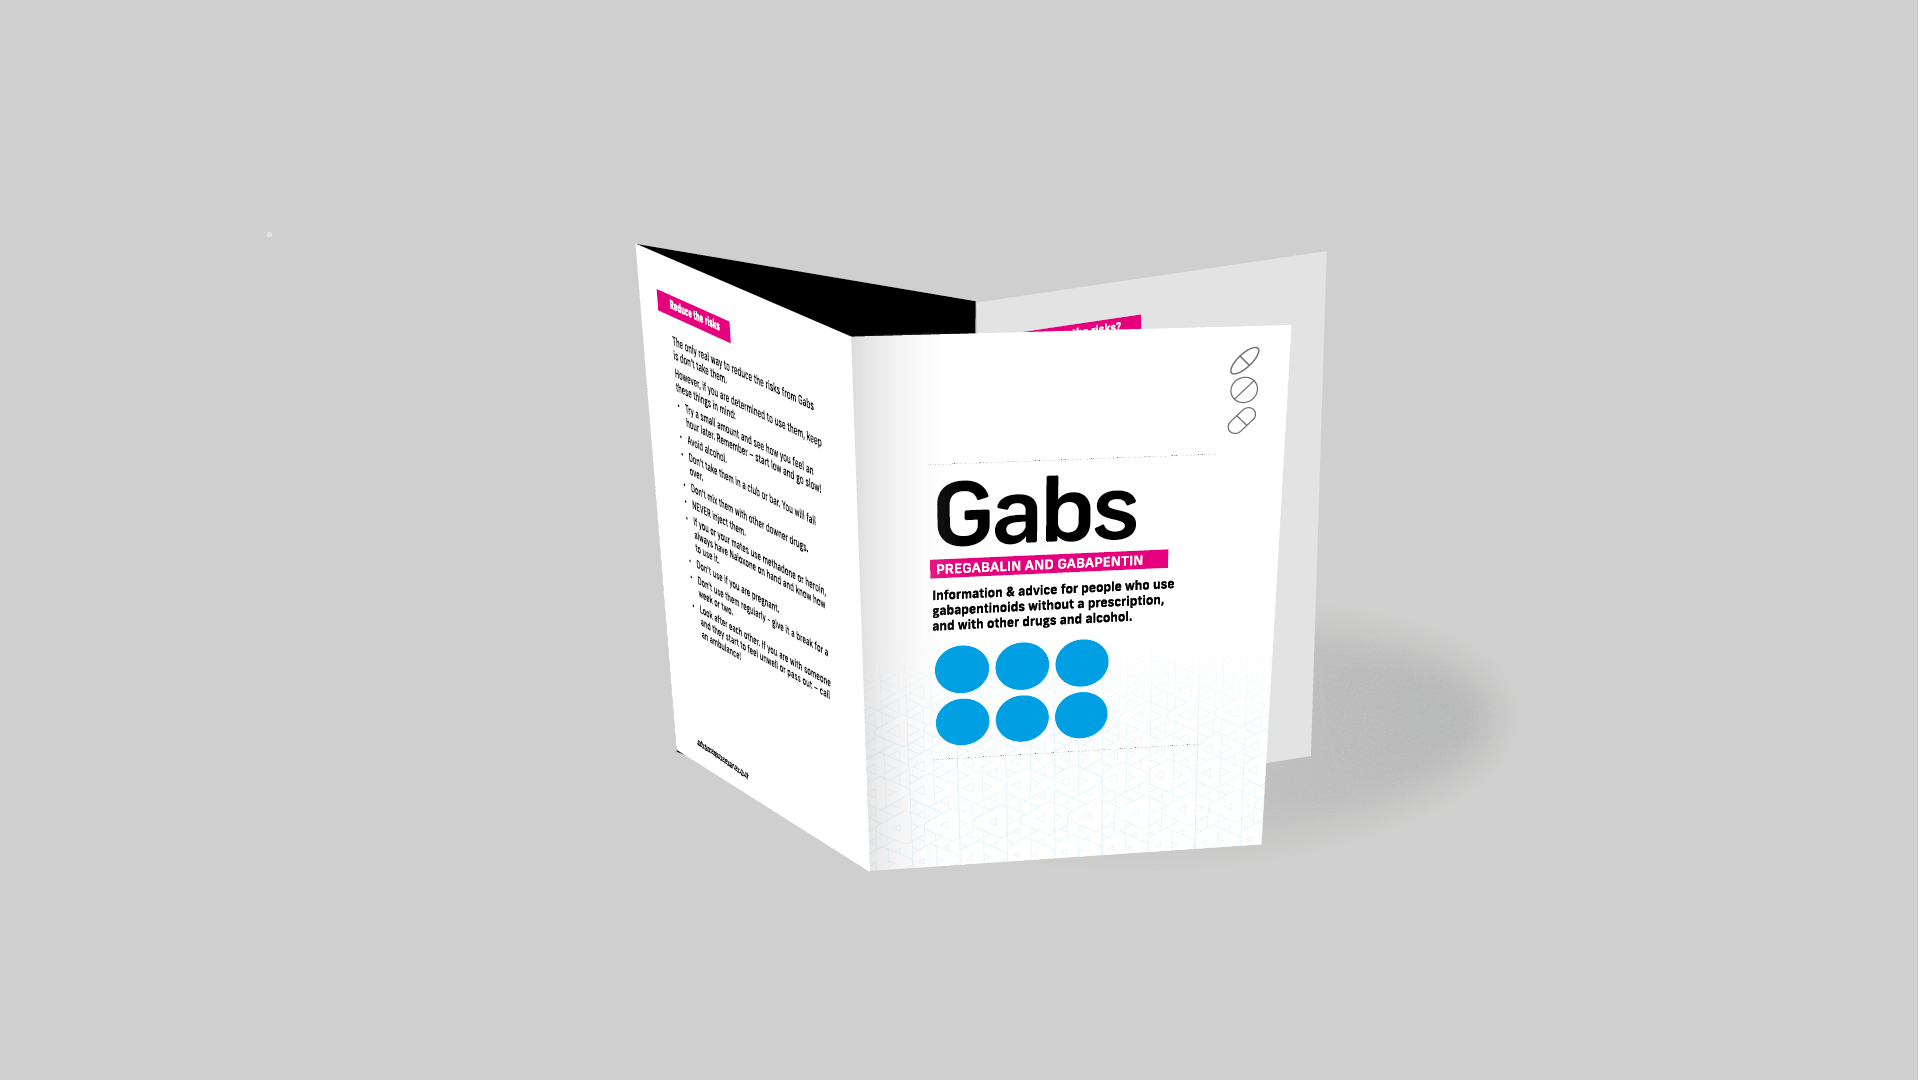 The word Gabs on top of 6 blue dots representing pregabalin and gabapentin, printed on the front of a folded health information harm reduction leaflet